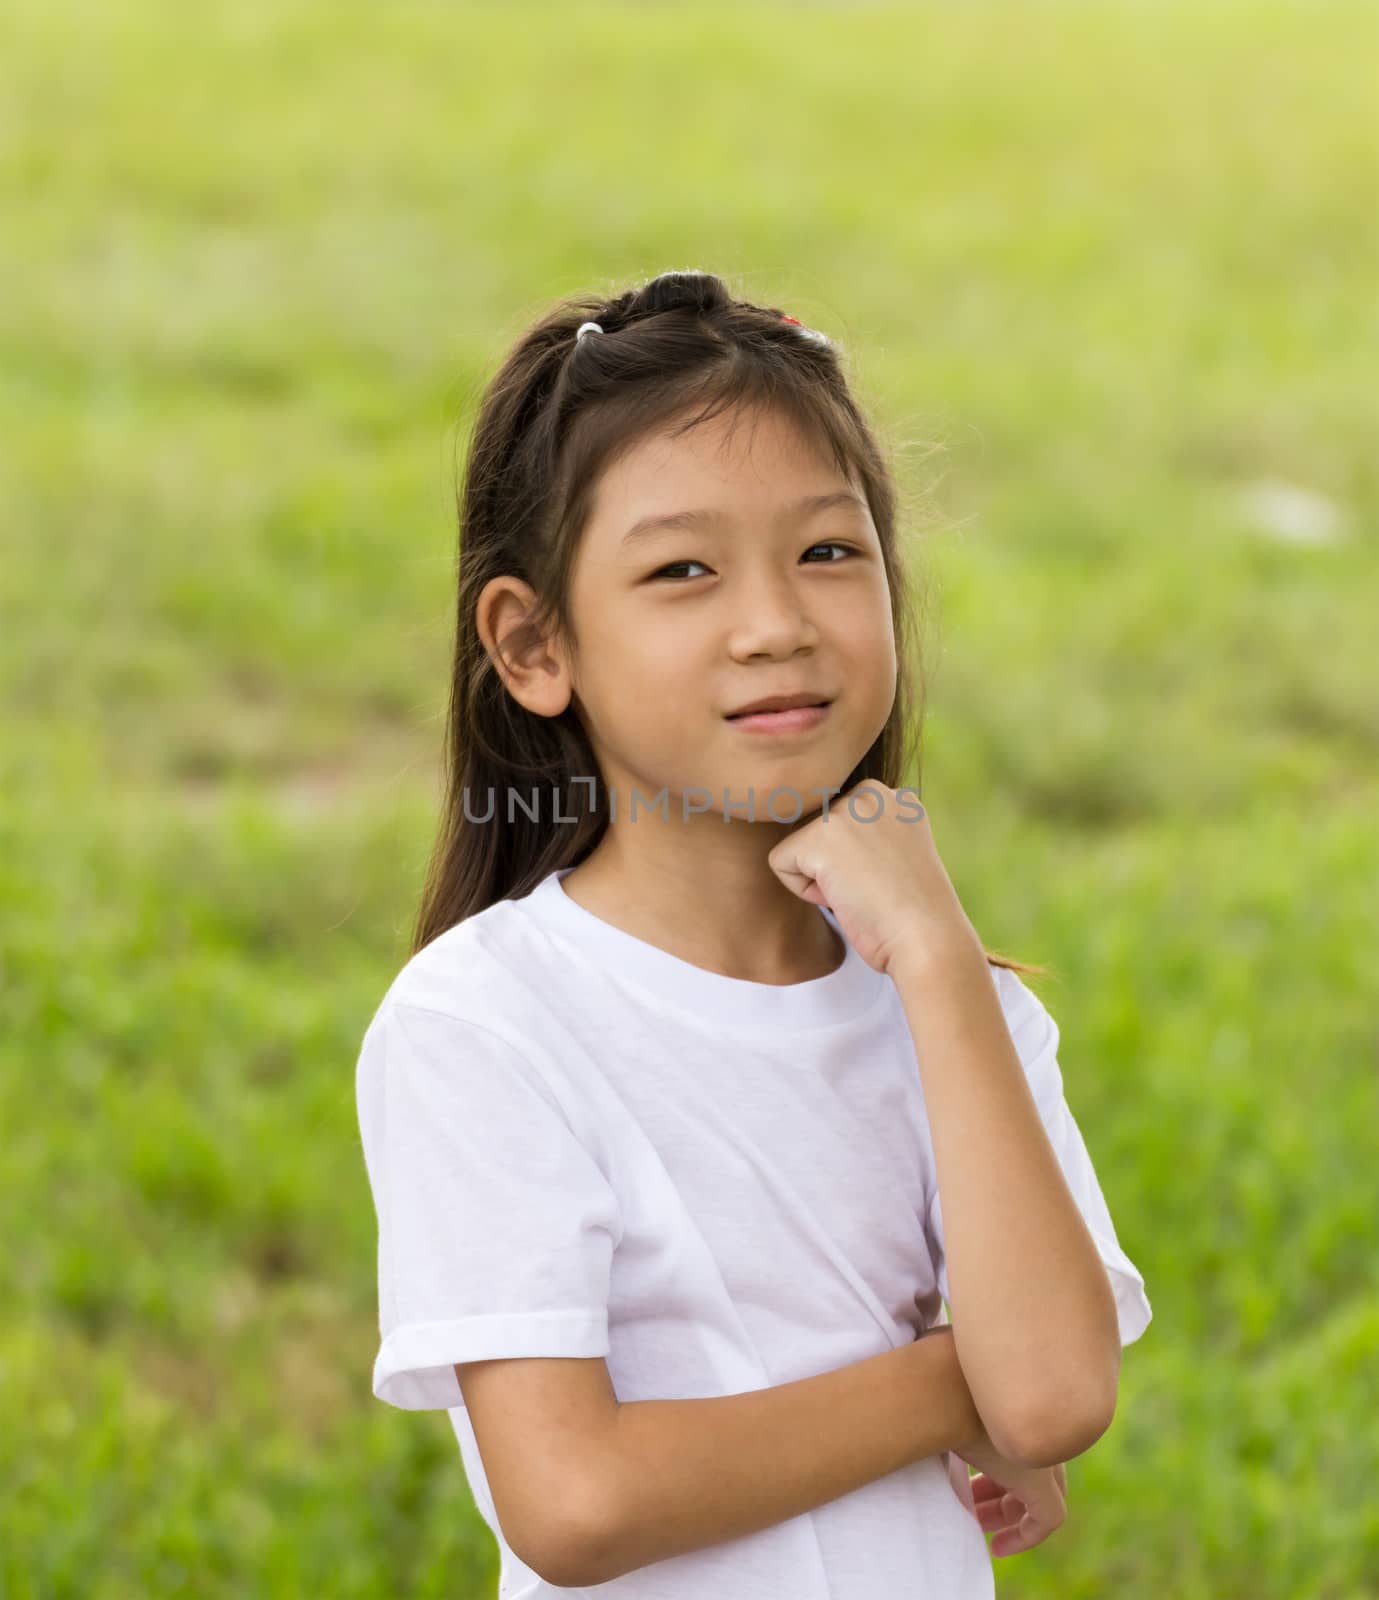 Portrait of Asian young girl by stoonn